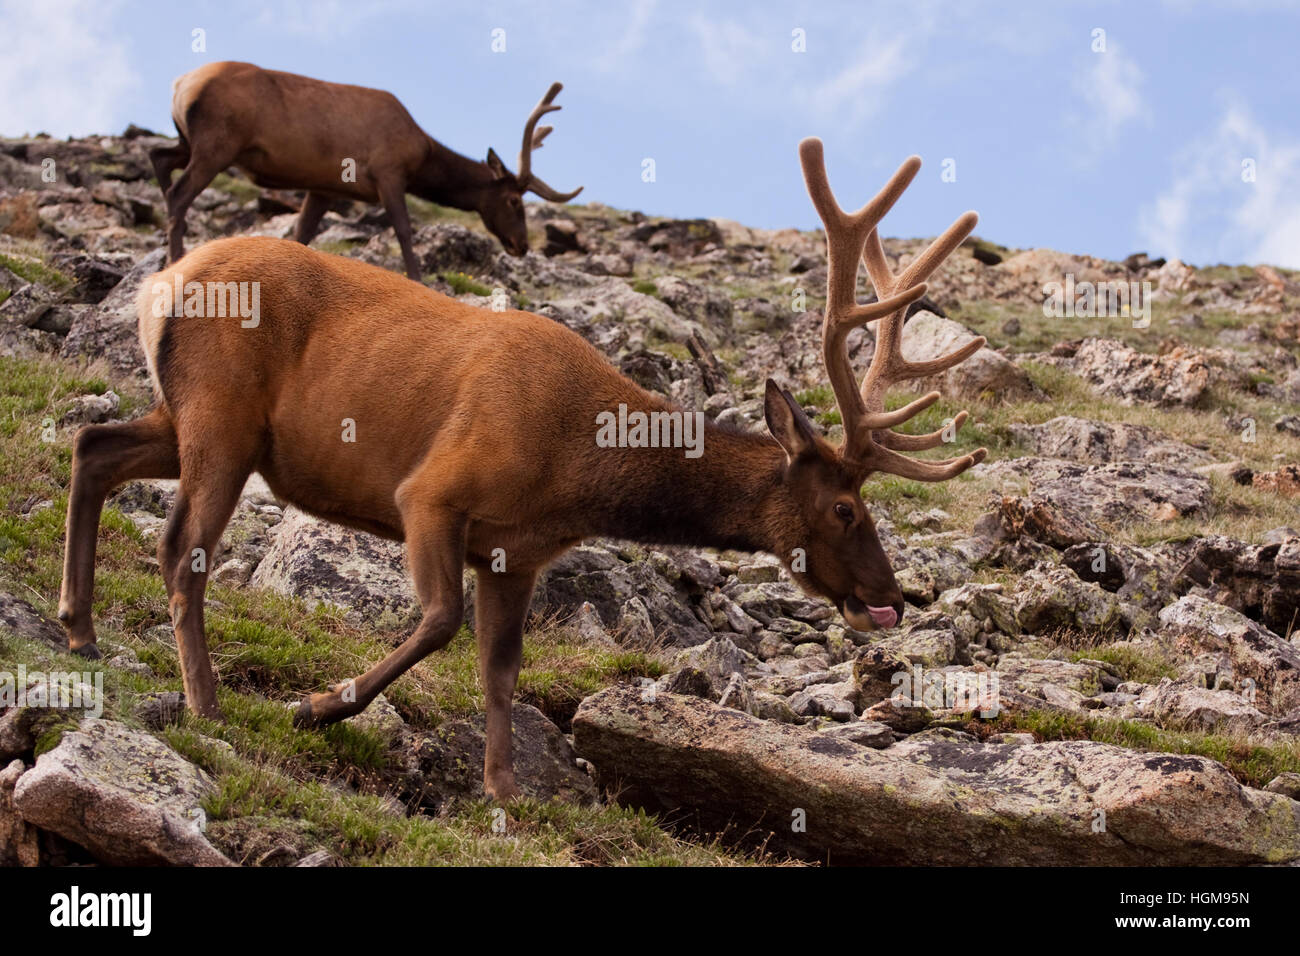 Two elk walk along a steep slope of green grass and many rocks. Both elk have large antlers covered in velvet. The closer of the two is licking his li Stock Photo